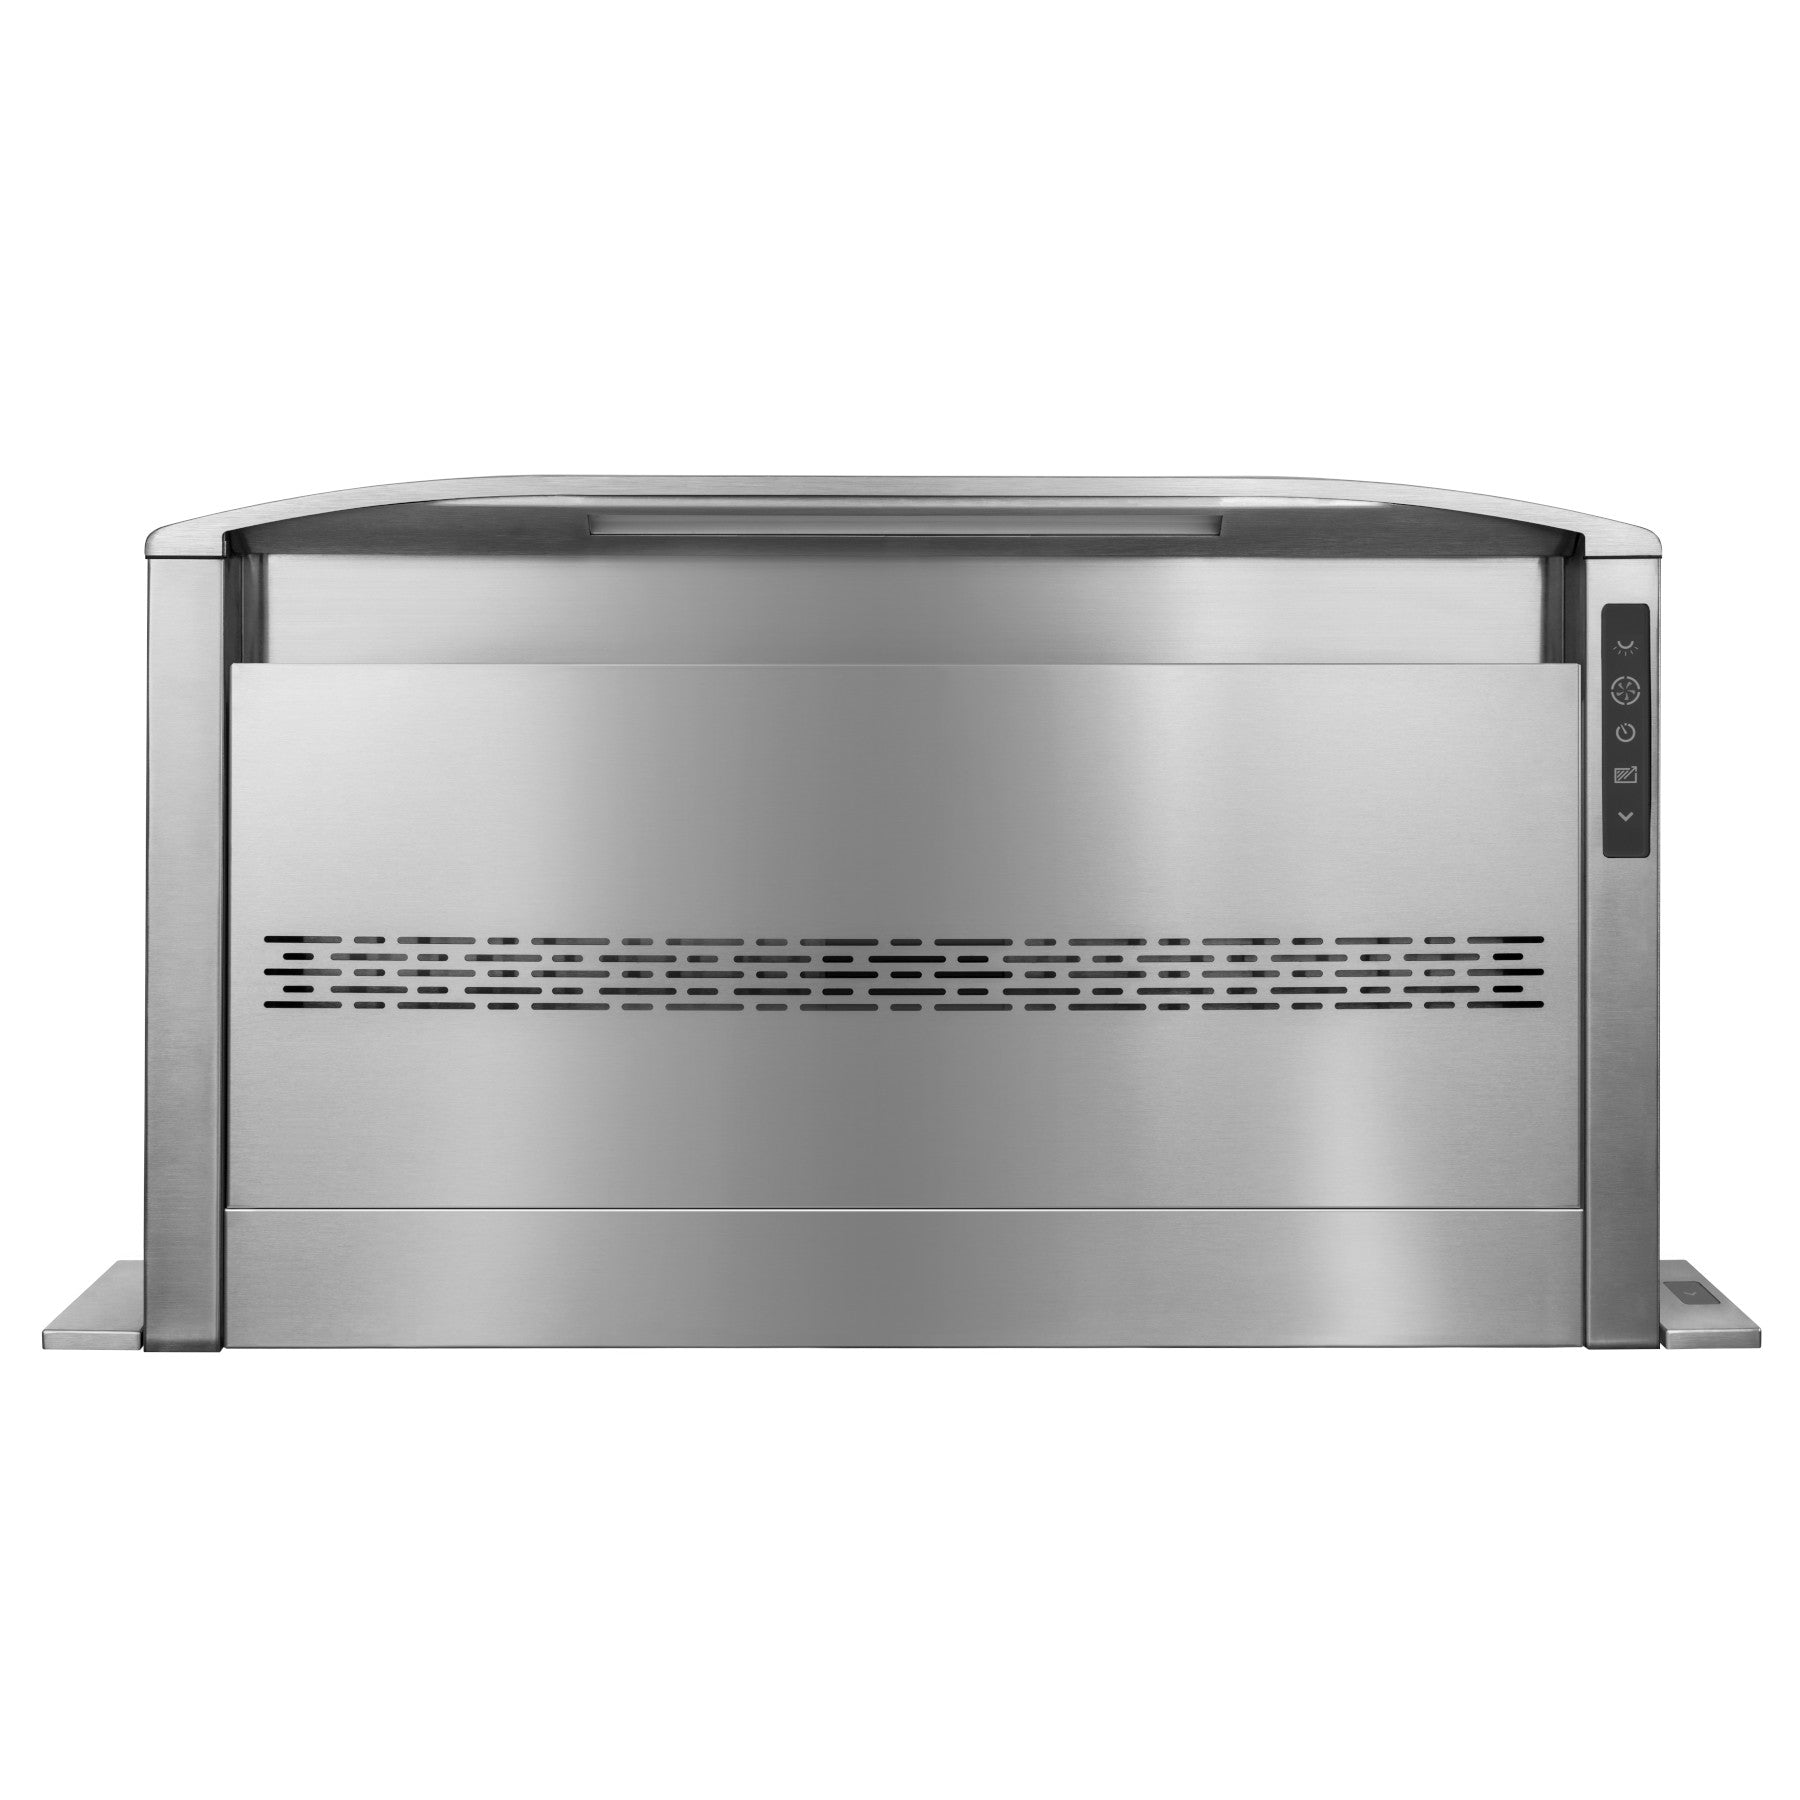 Best - 30 Inch Downdraft Vent in Stainless - D49M30SB